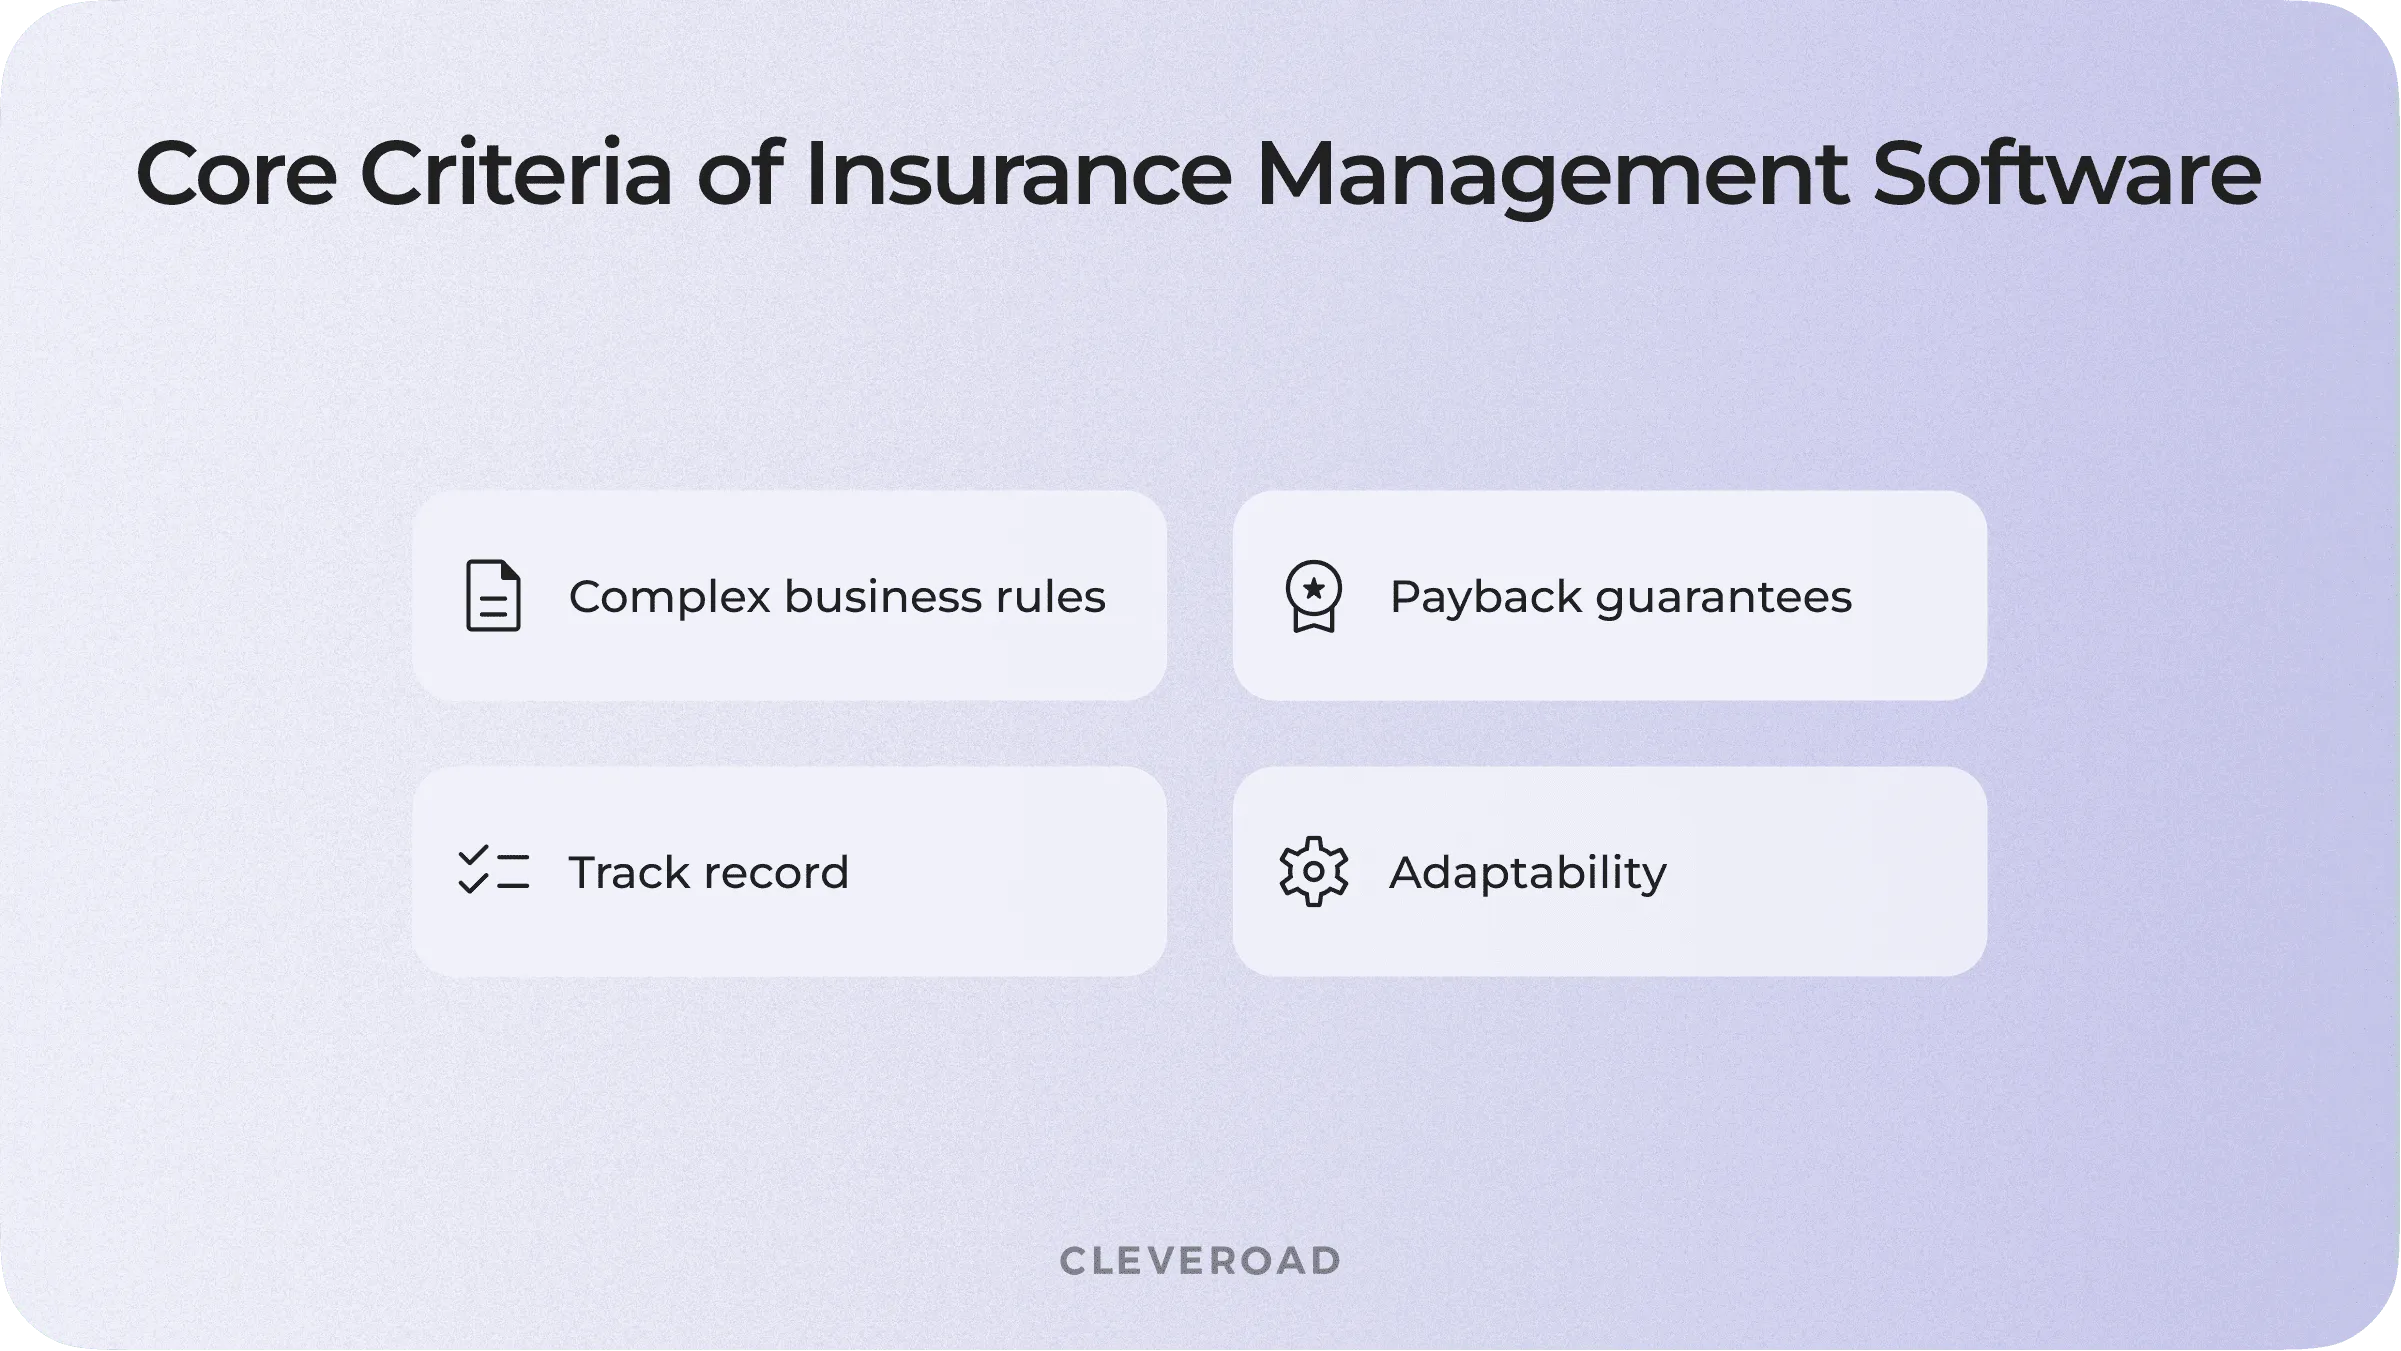 Core criteria of insurance management software